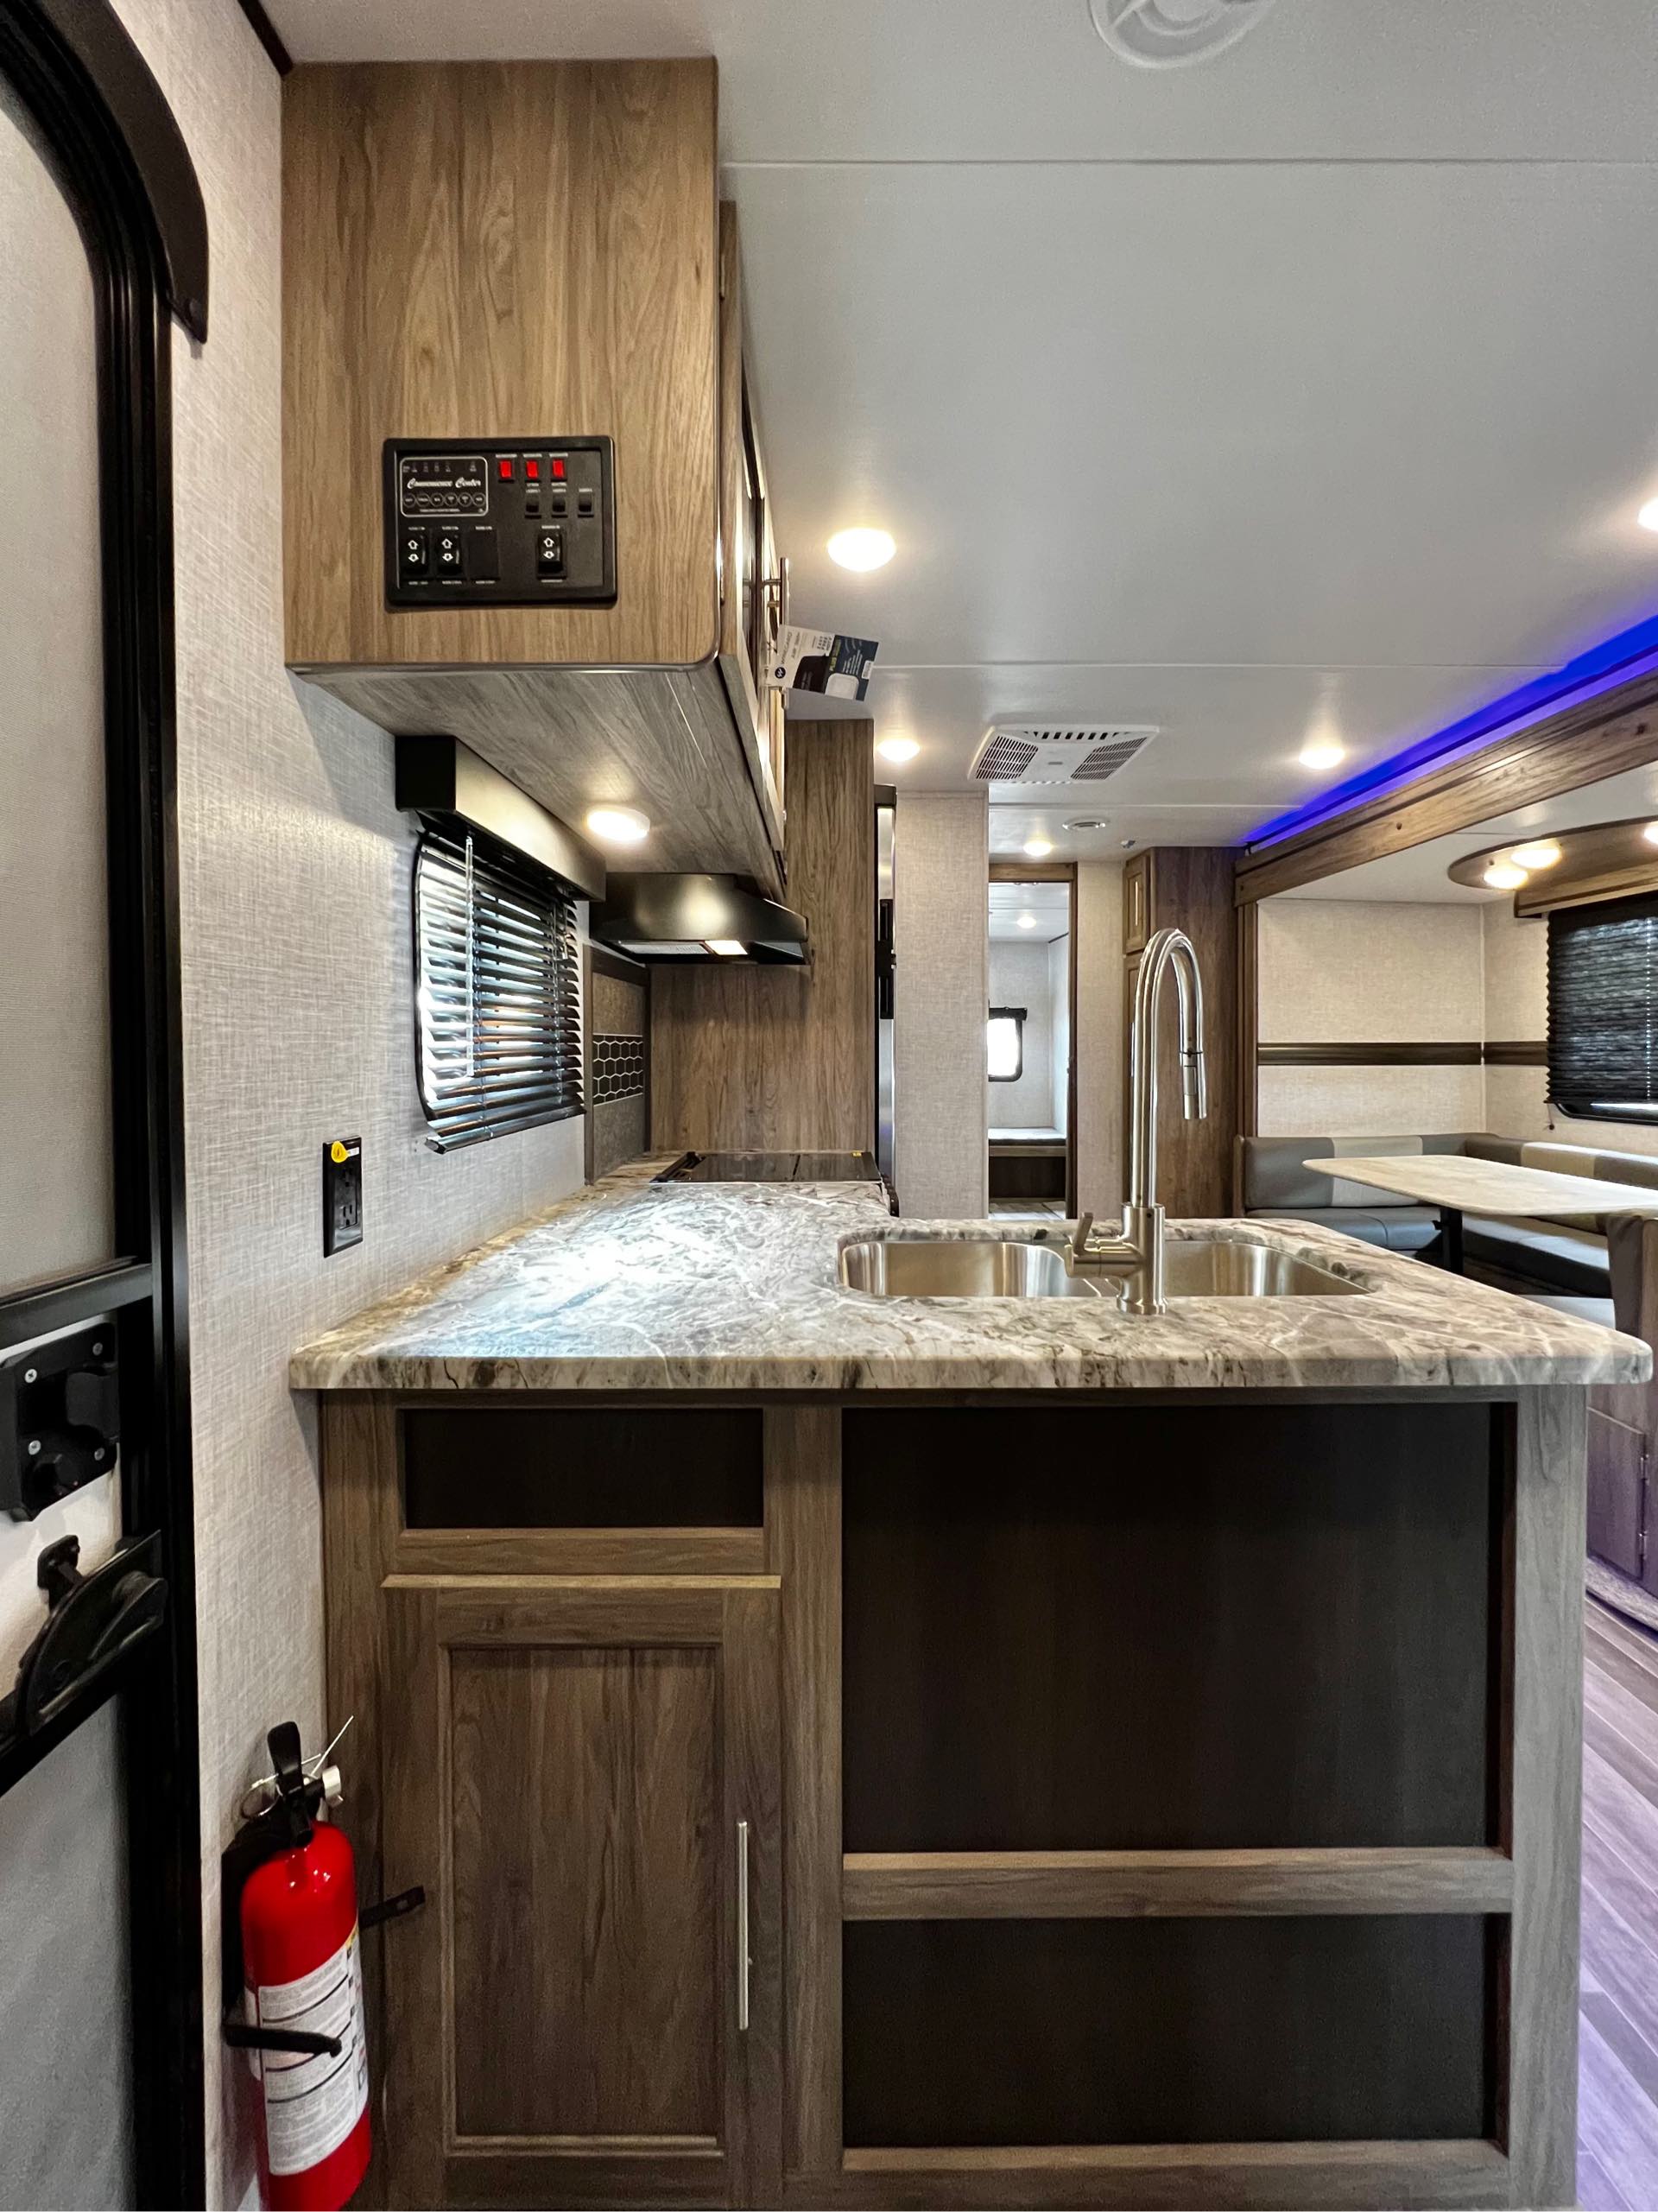 2022 CrossRoads Zinger ZR328SB at Lee's Country RV